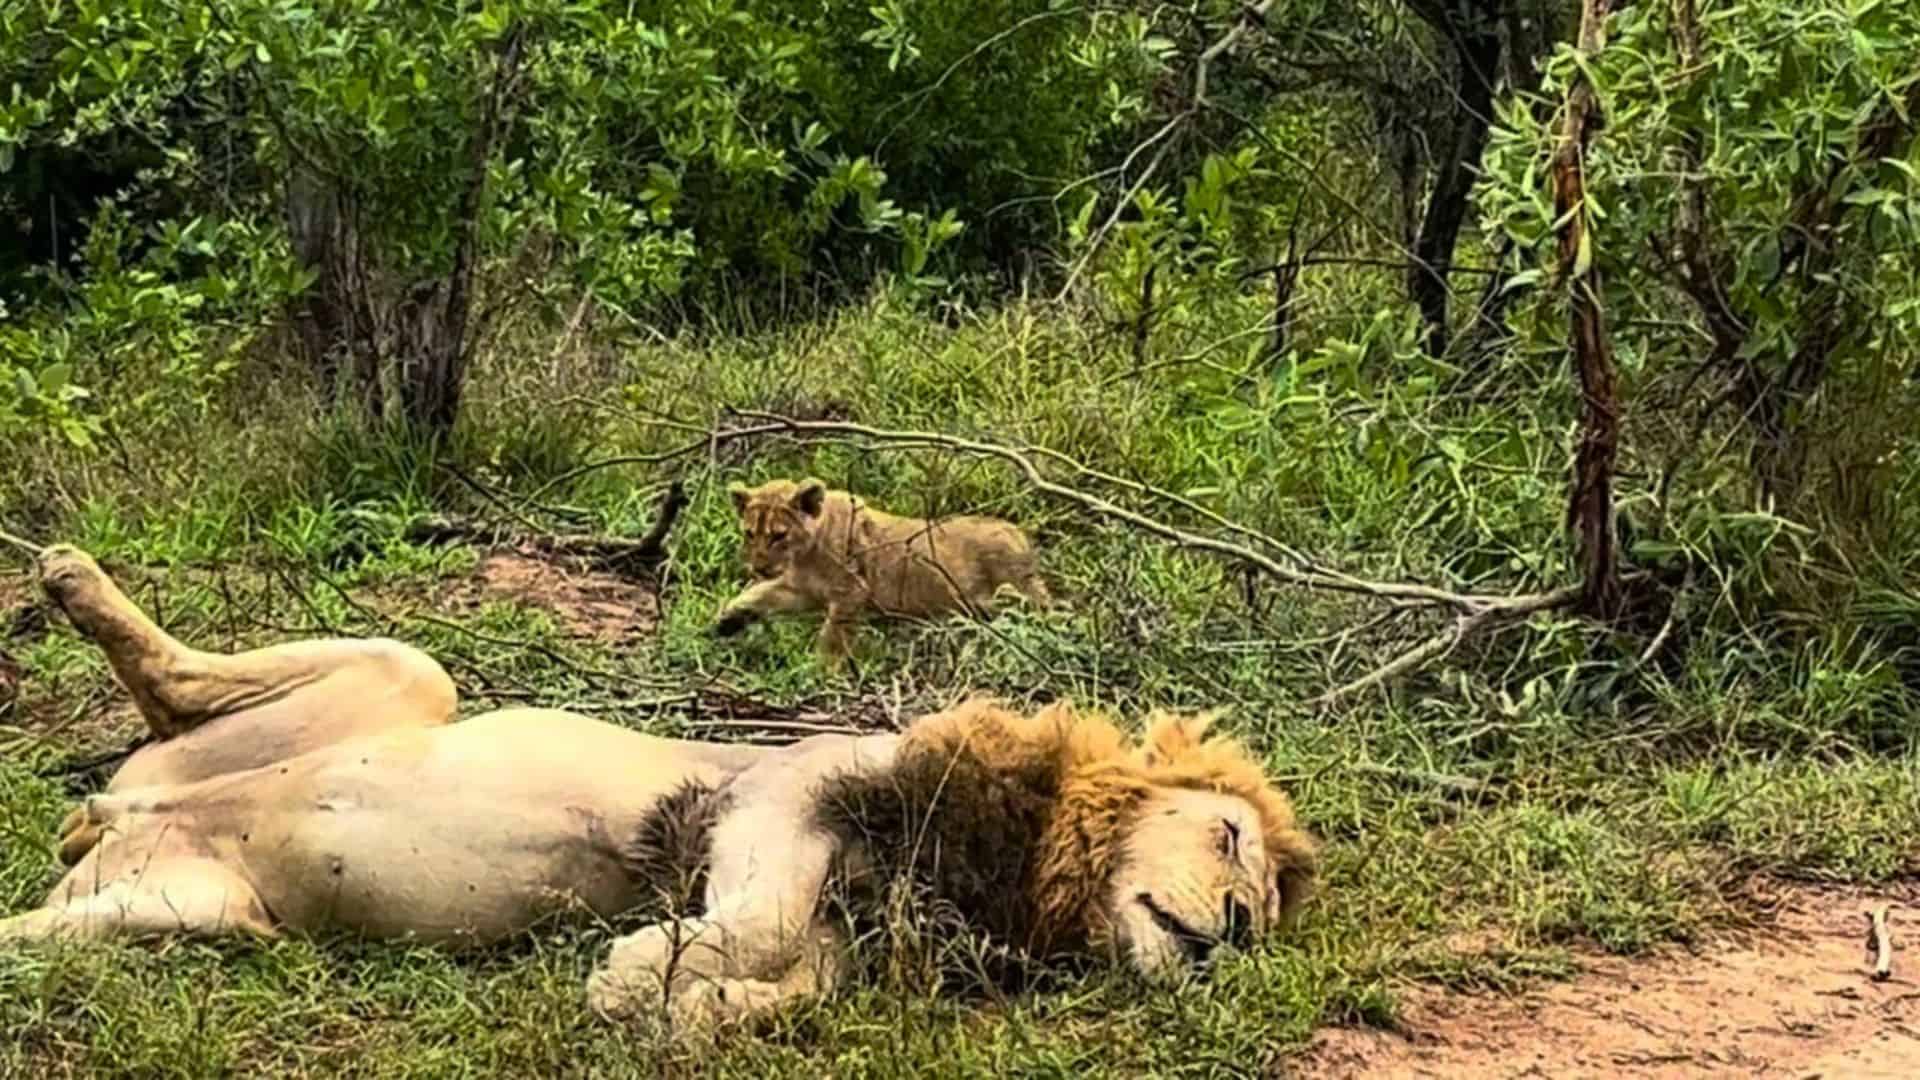 Male Lion Gets Stalked by Unsuspecting Predator